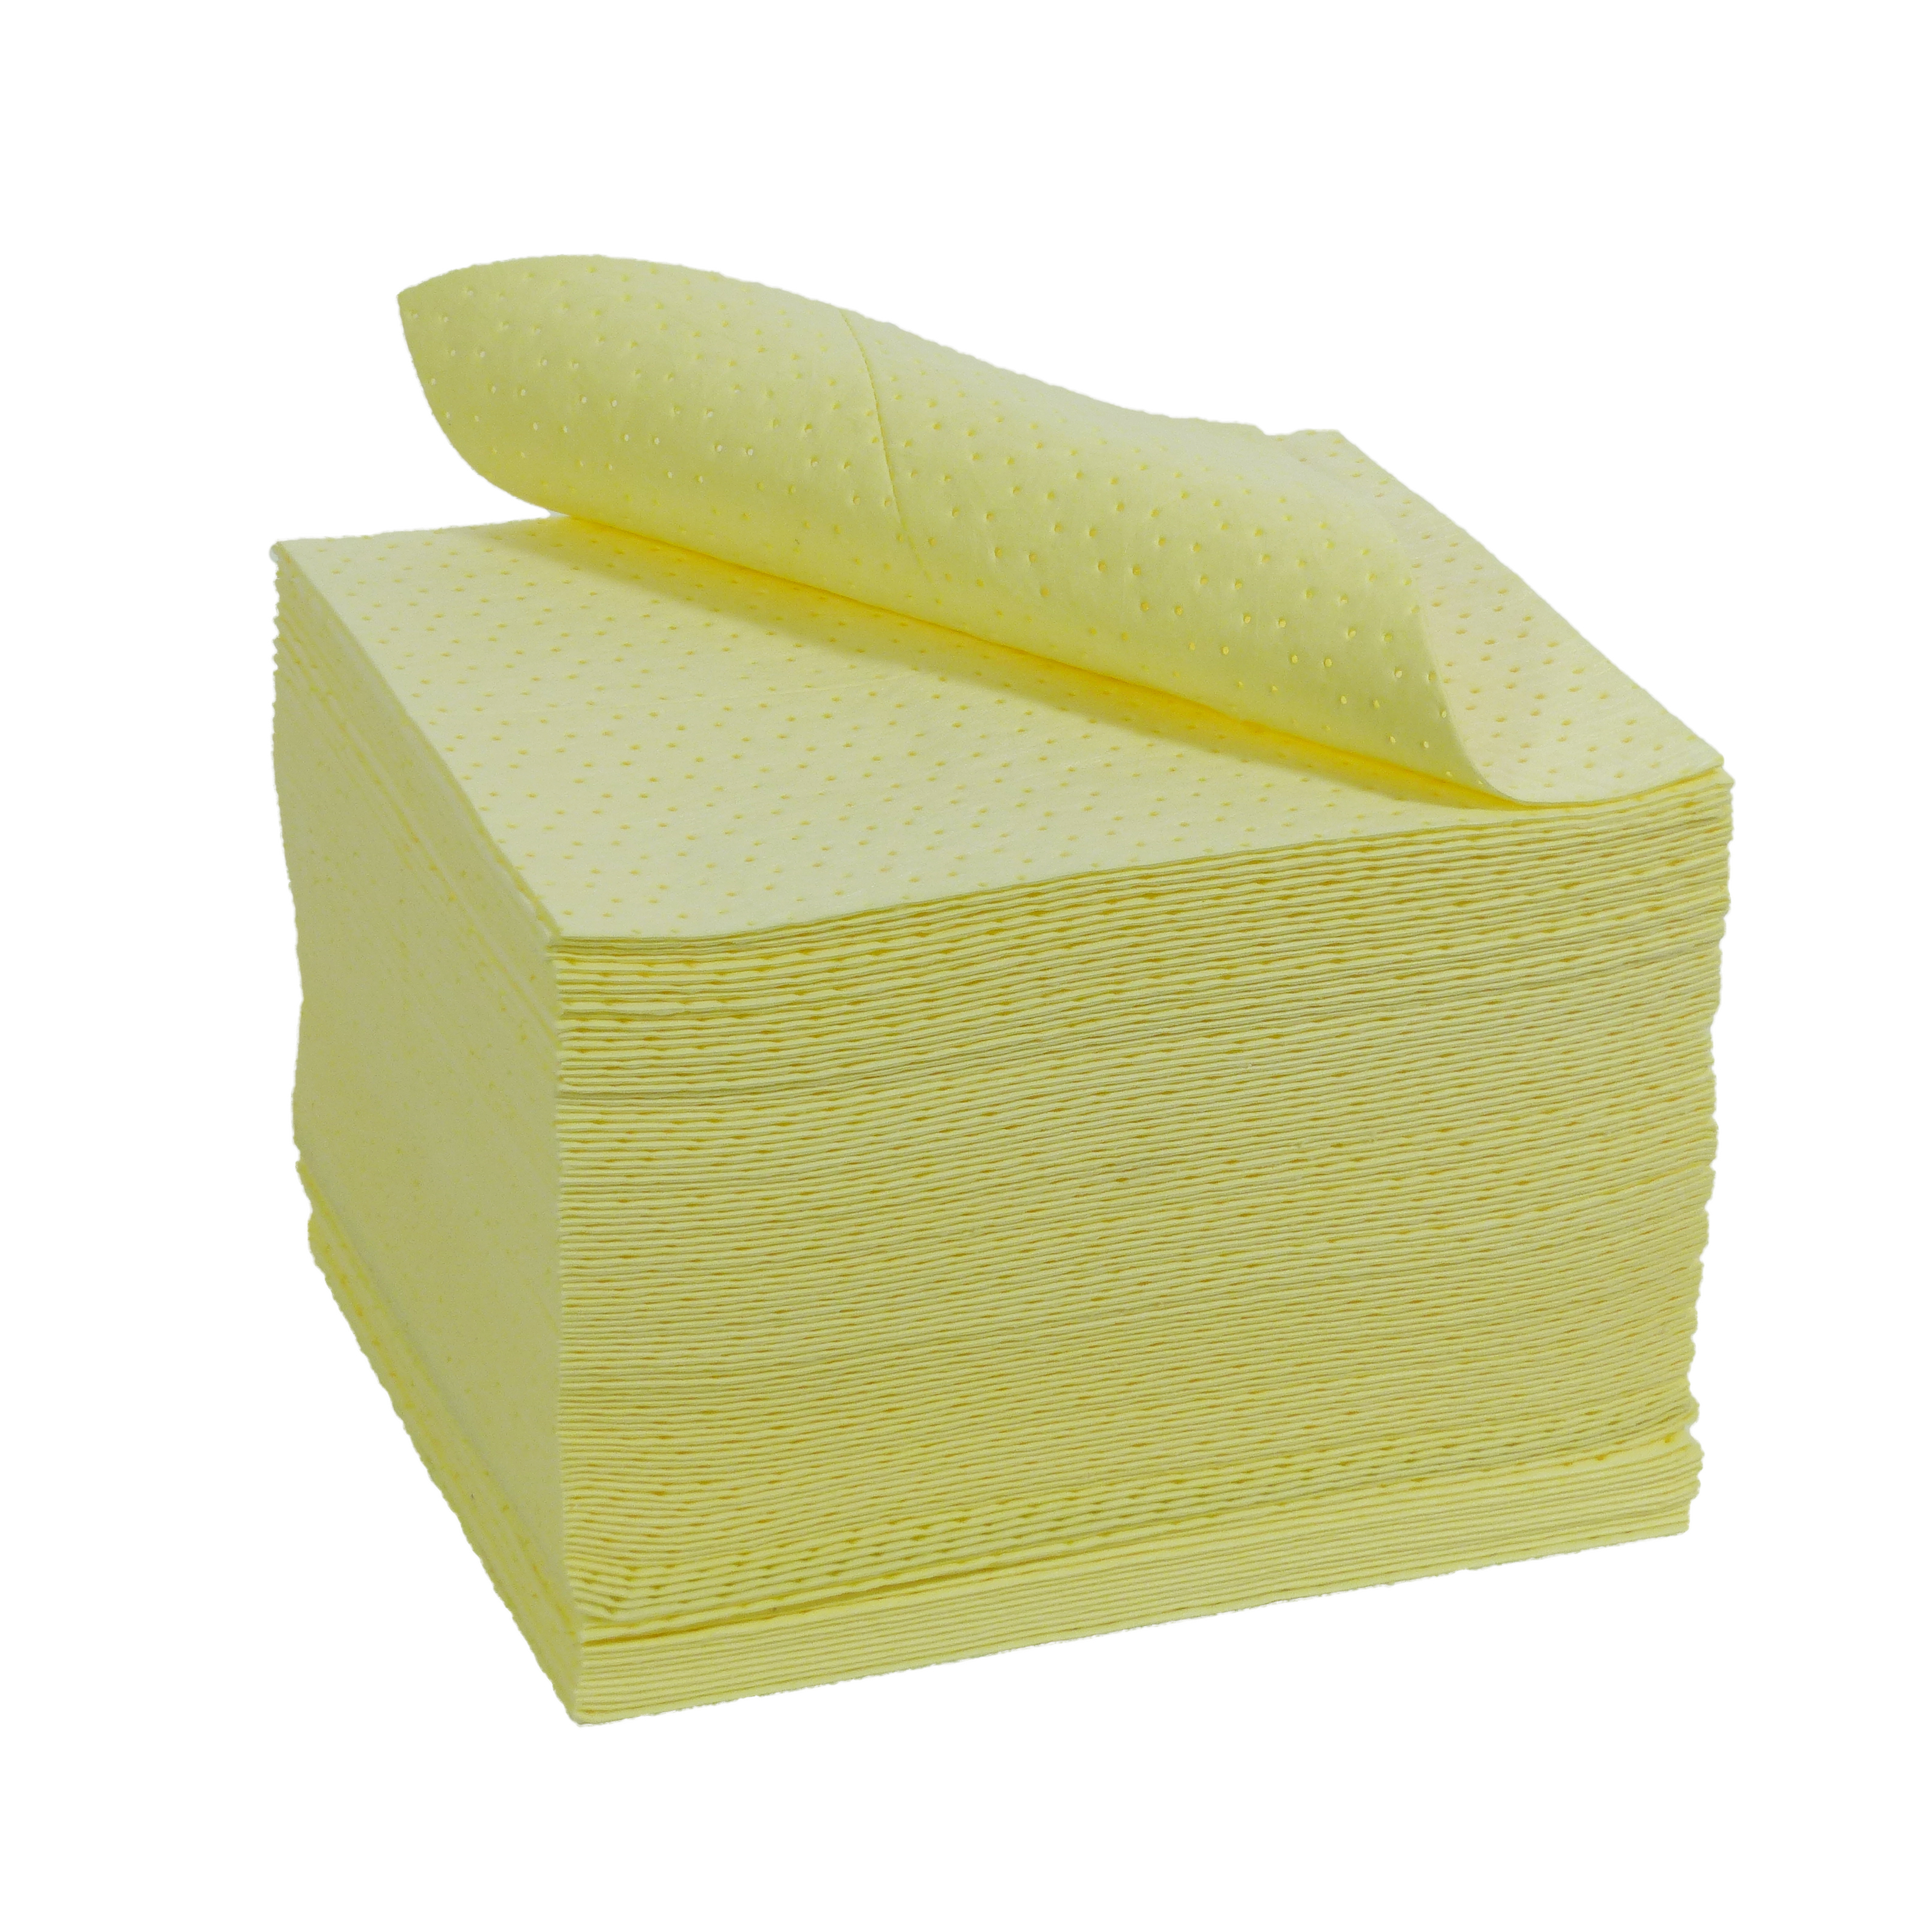 ICOSORB&#174; SM HEAVY yellow in a box